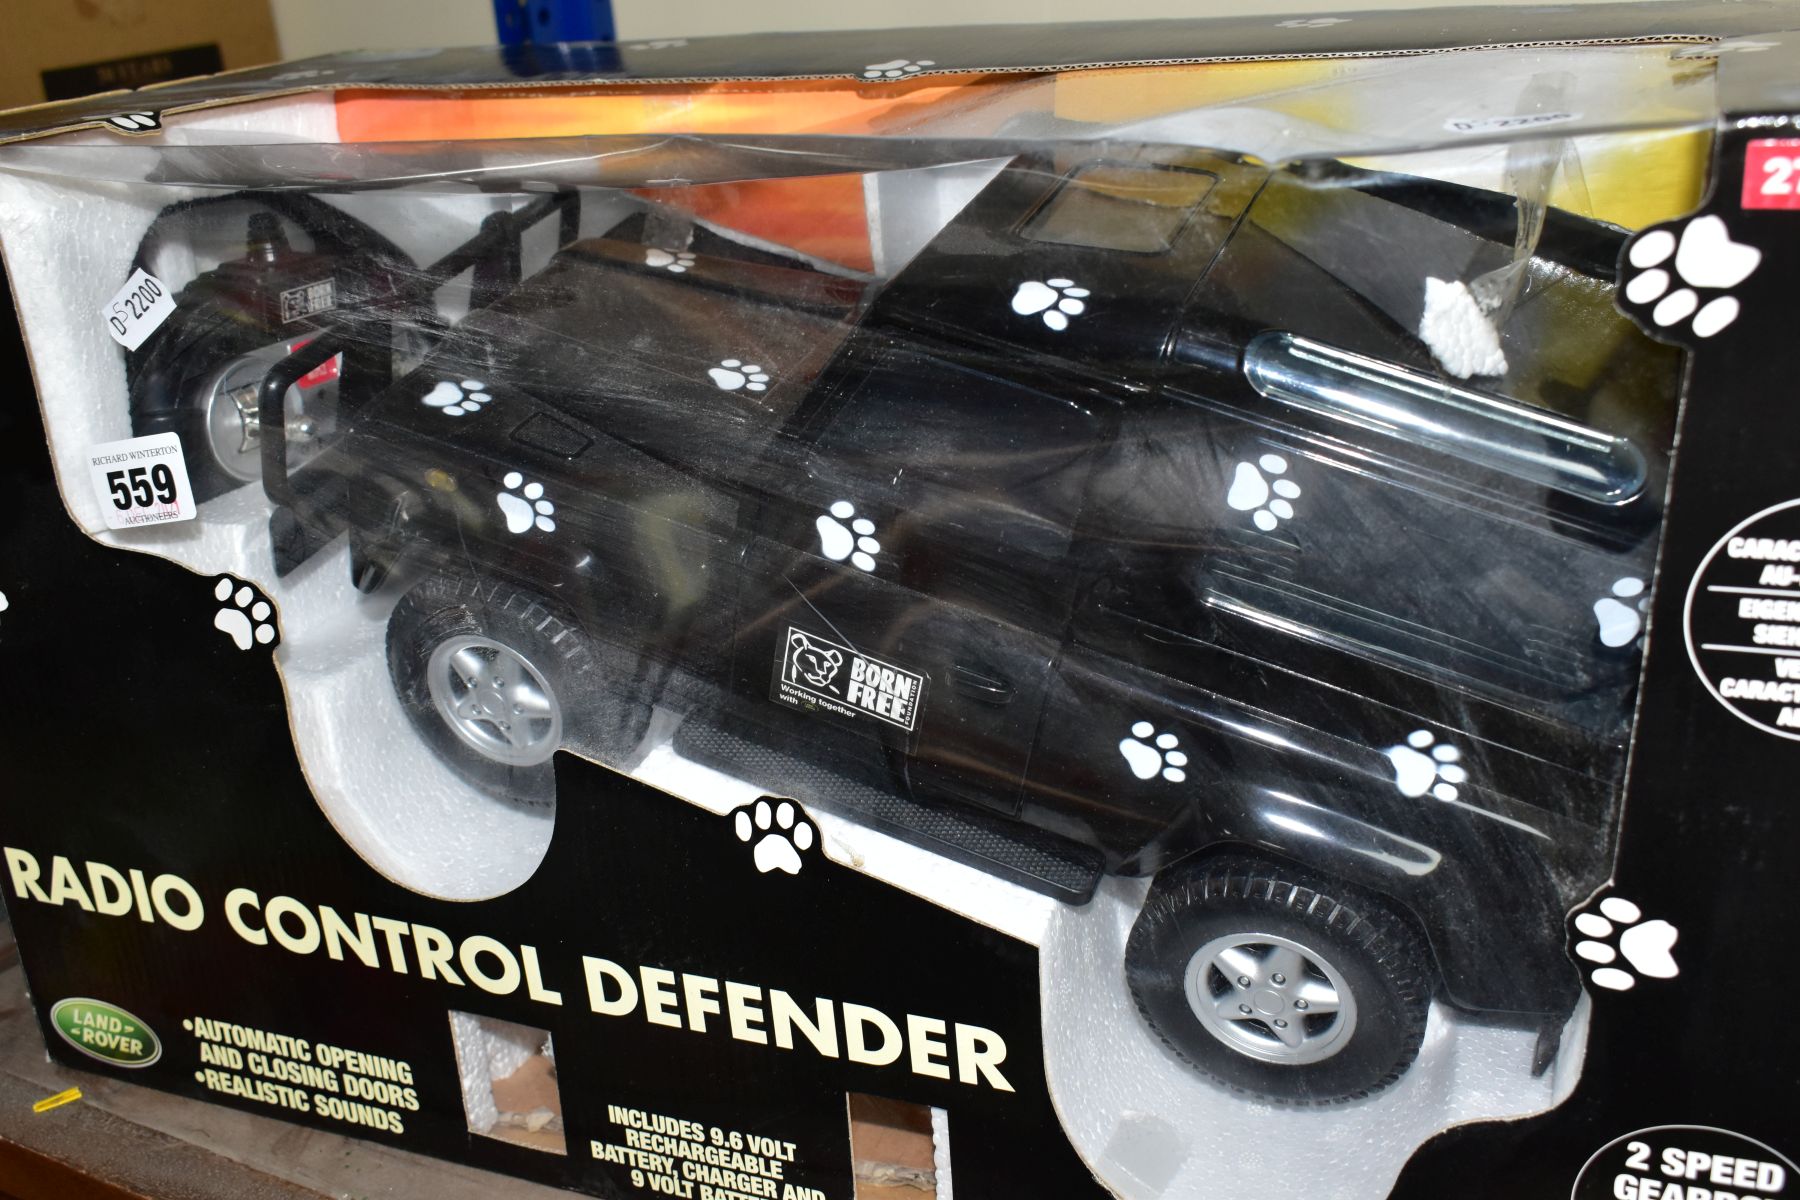 A BOXED RADIO CONTROLLED LAND ROVER DEFENDER, black Born Free edition, in original packaging with - Image 4 of 4